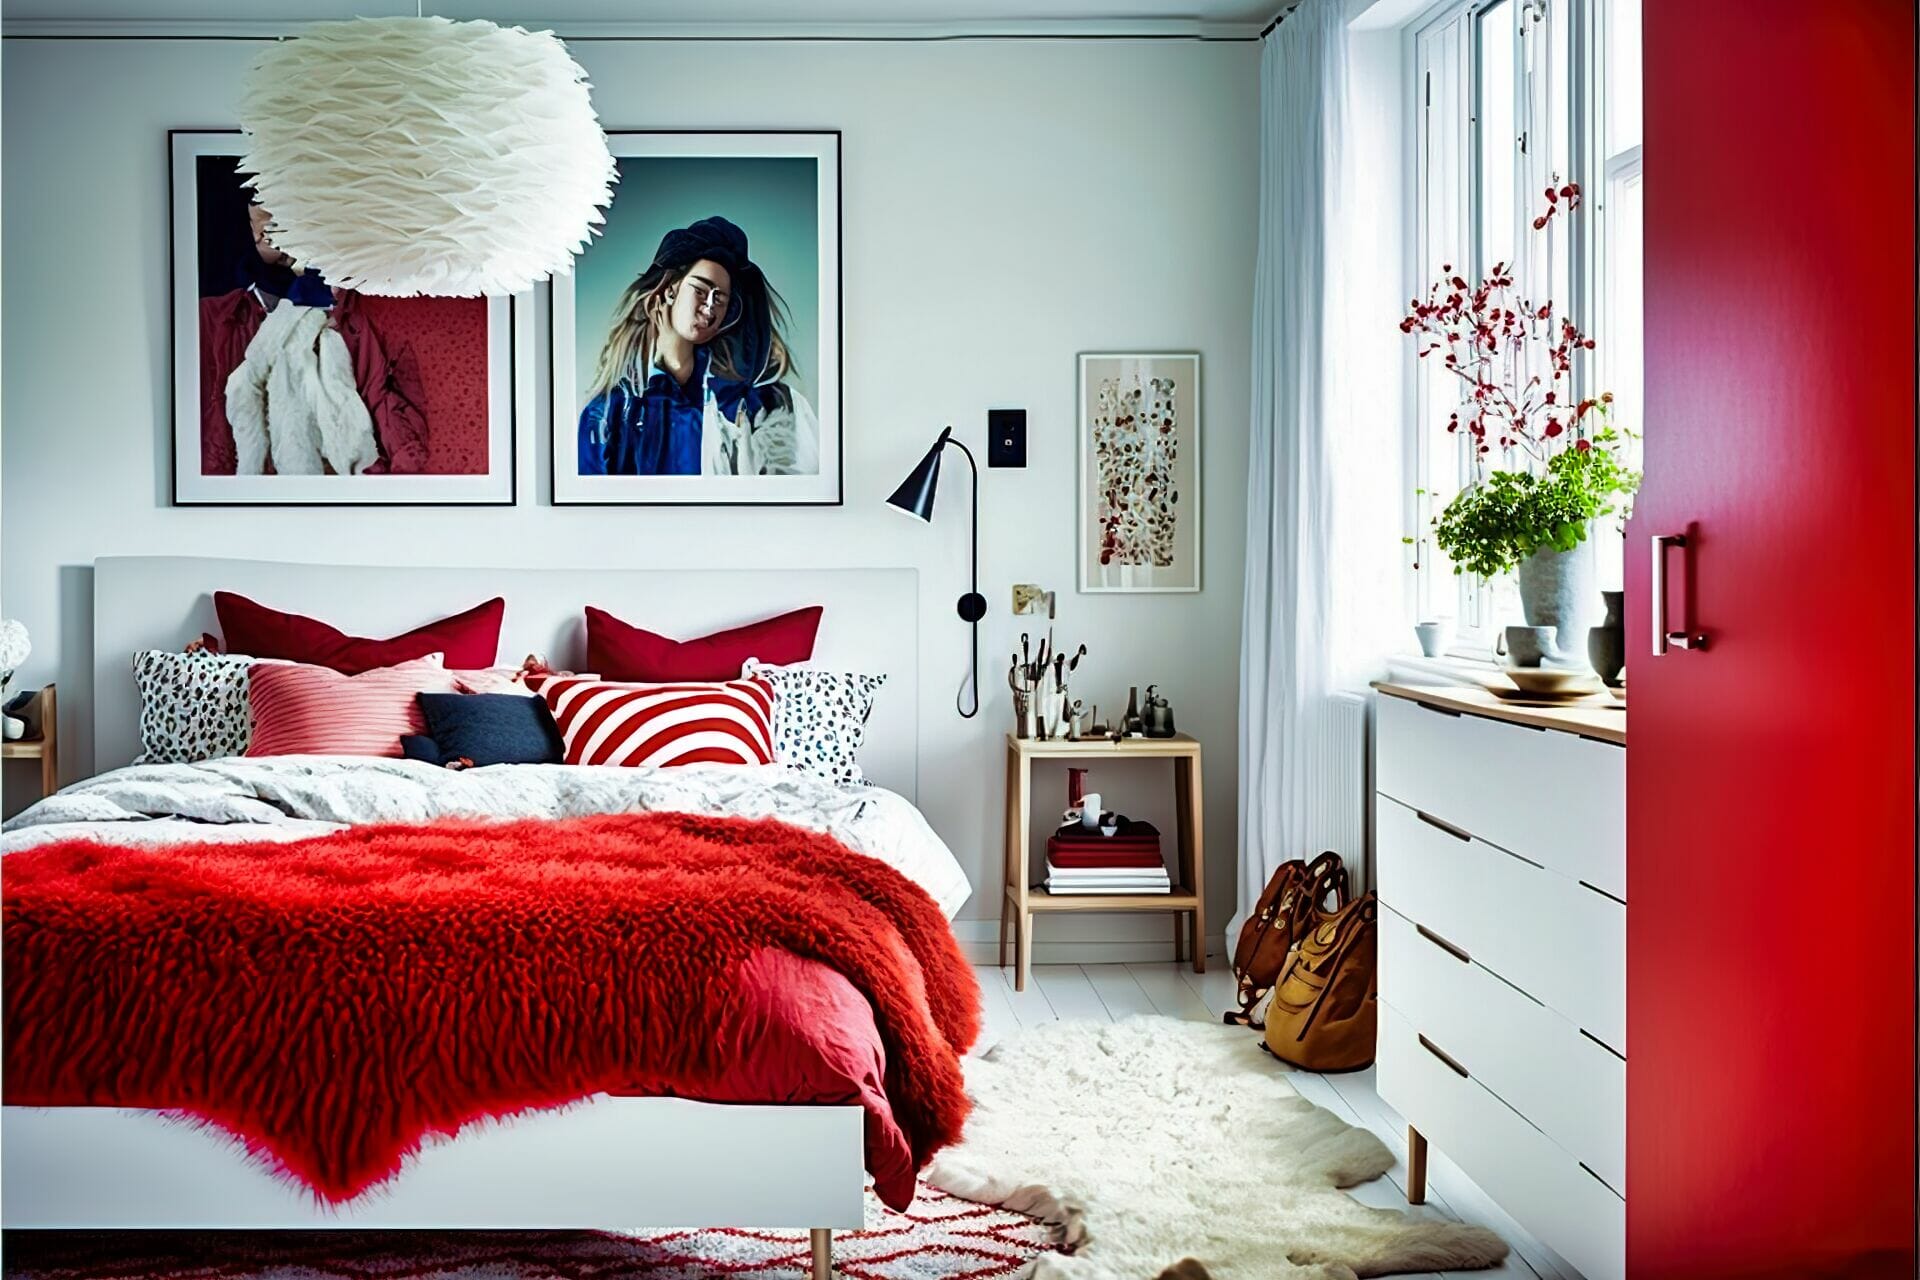 A Scandinavian Style Bedroom With Red And White Accents – This Bedroom Is A Mix Of Bold Colors And Bright Whites. The Walls Are A Bright White, While The Bed Frame And Nightstand Are A Deep Red Wood. To Complete The Look, A White Fur Rug Lies On The Floor, And Art Prints With Red And White Colors Hang On The Walls.